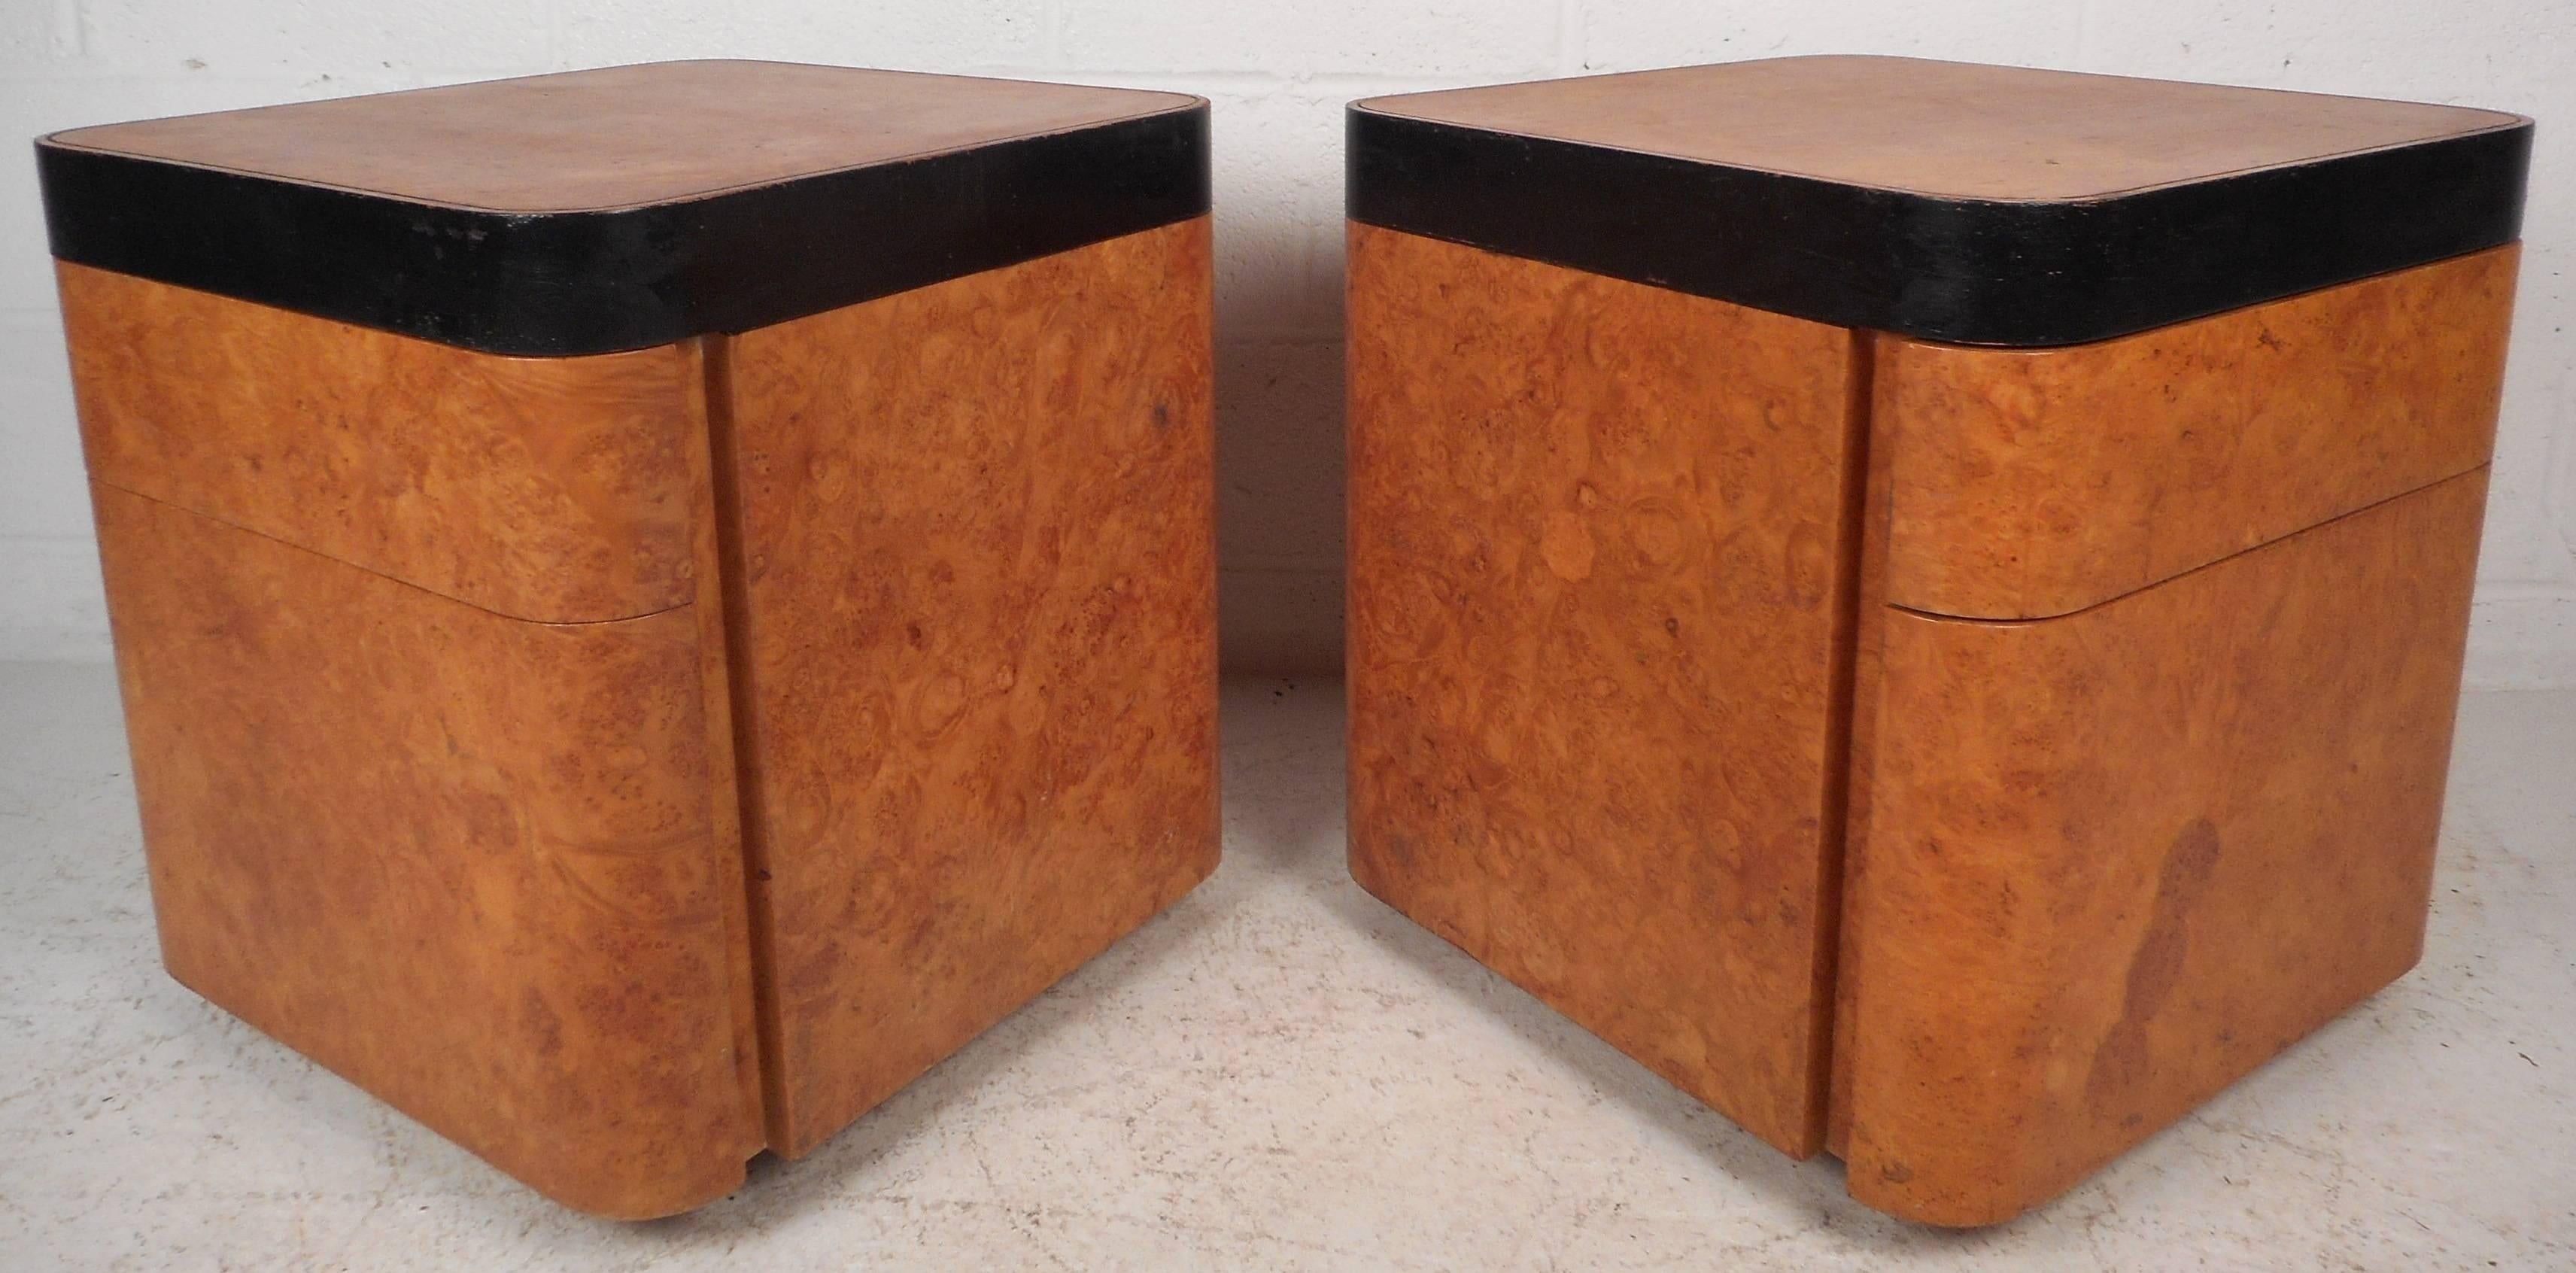 Beautiful pair of vintage modern burl end tables with a unique black wood strip around the top. Sleek two-tone design with ample storage space in its two hefty drawers. These versatile pieces can be used as night stands or end tables. This unique